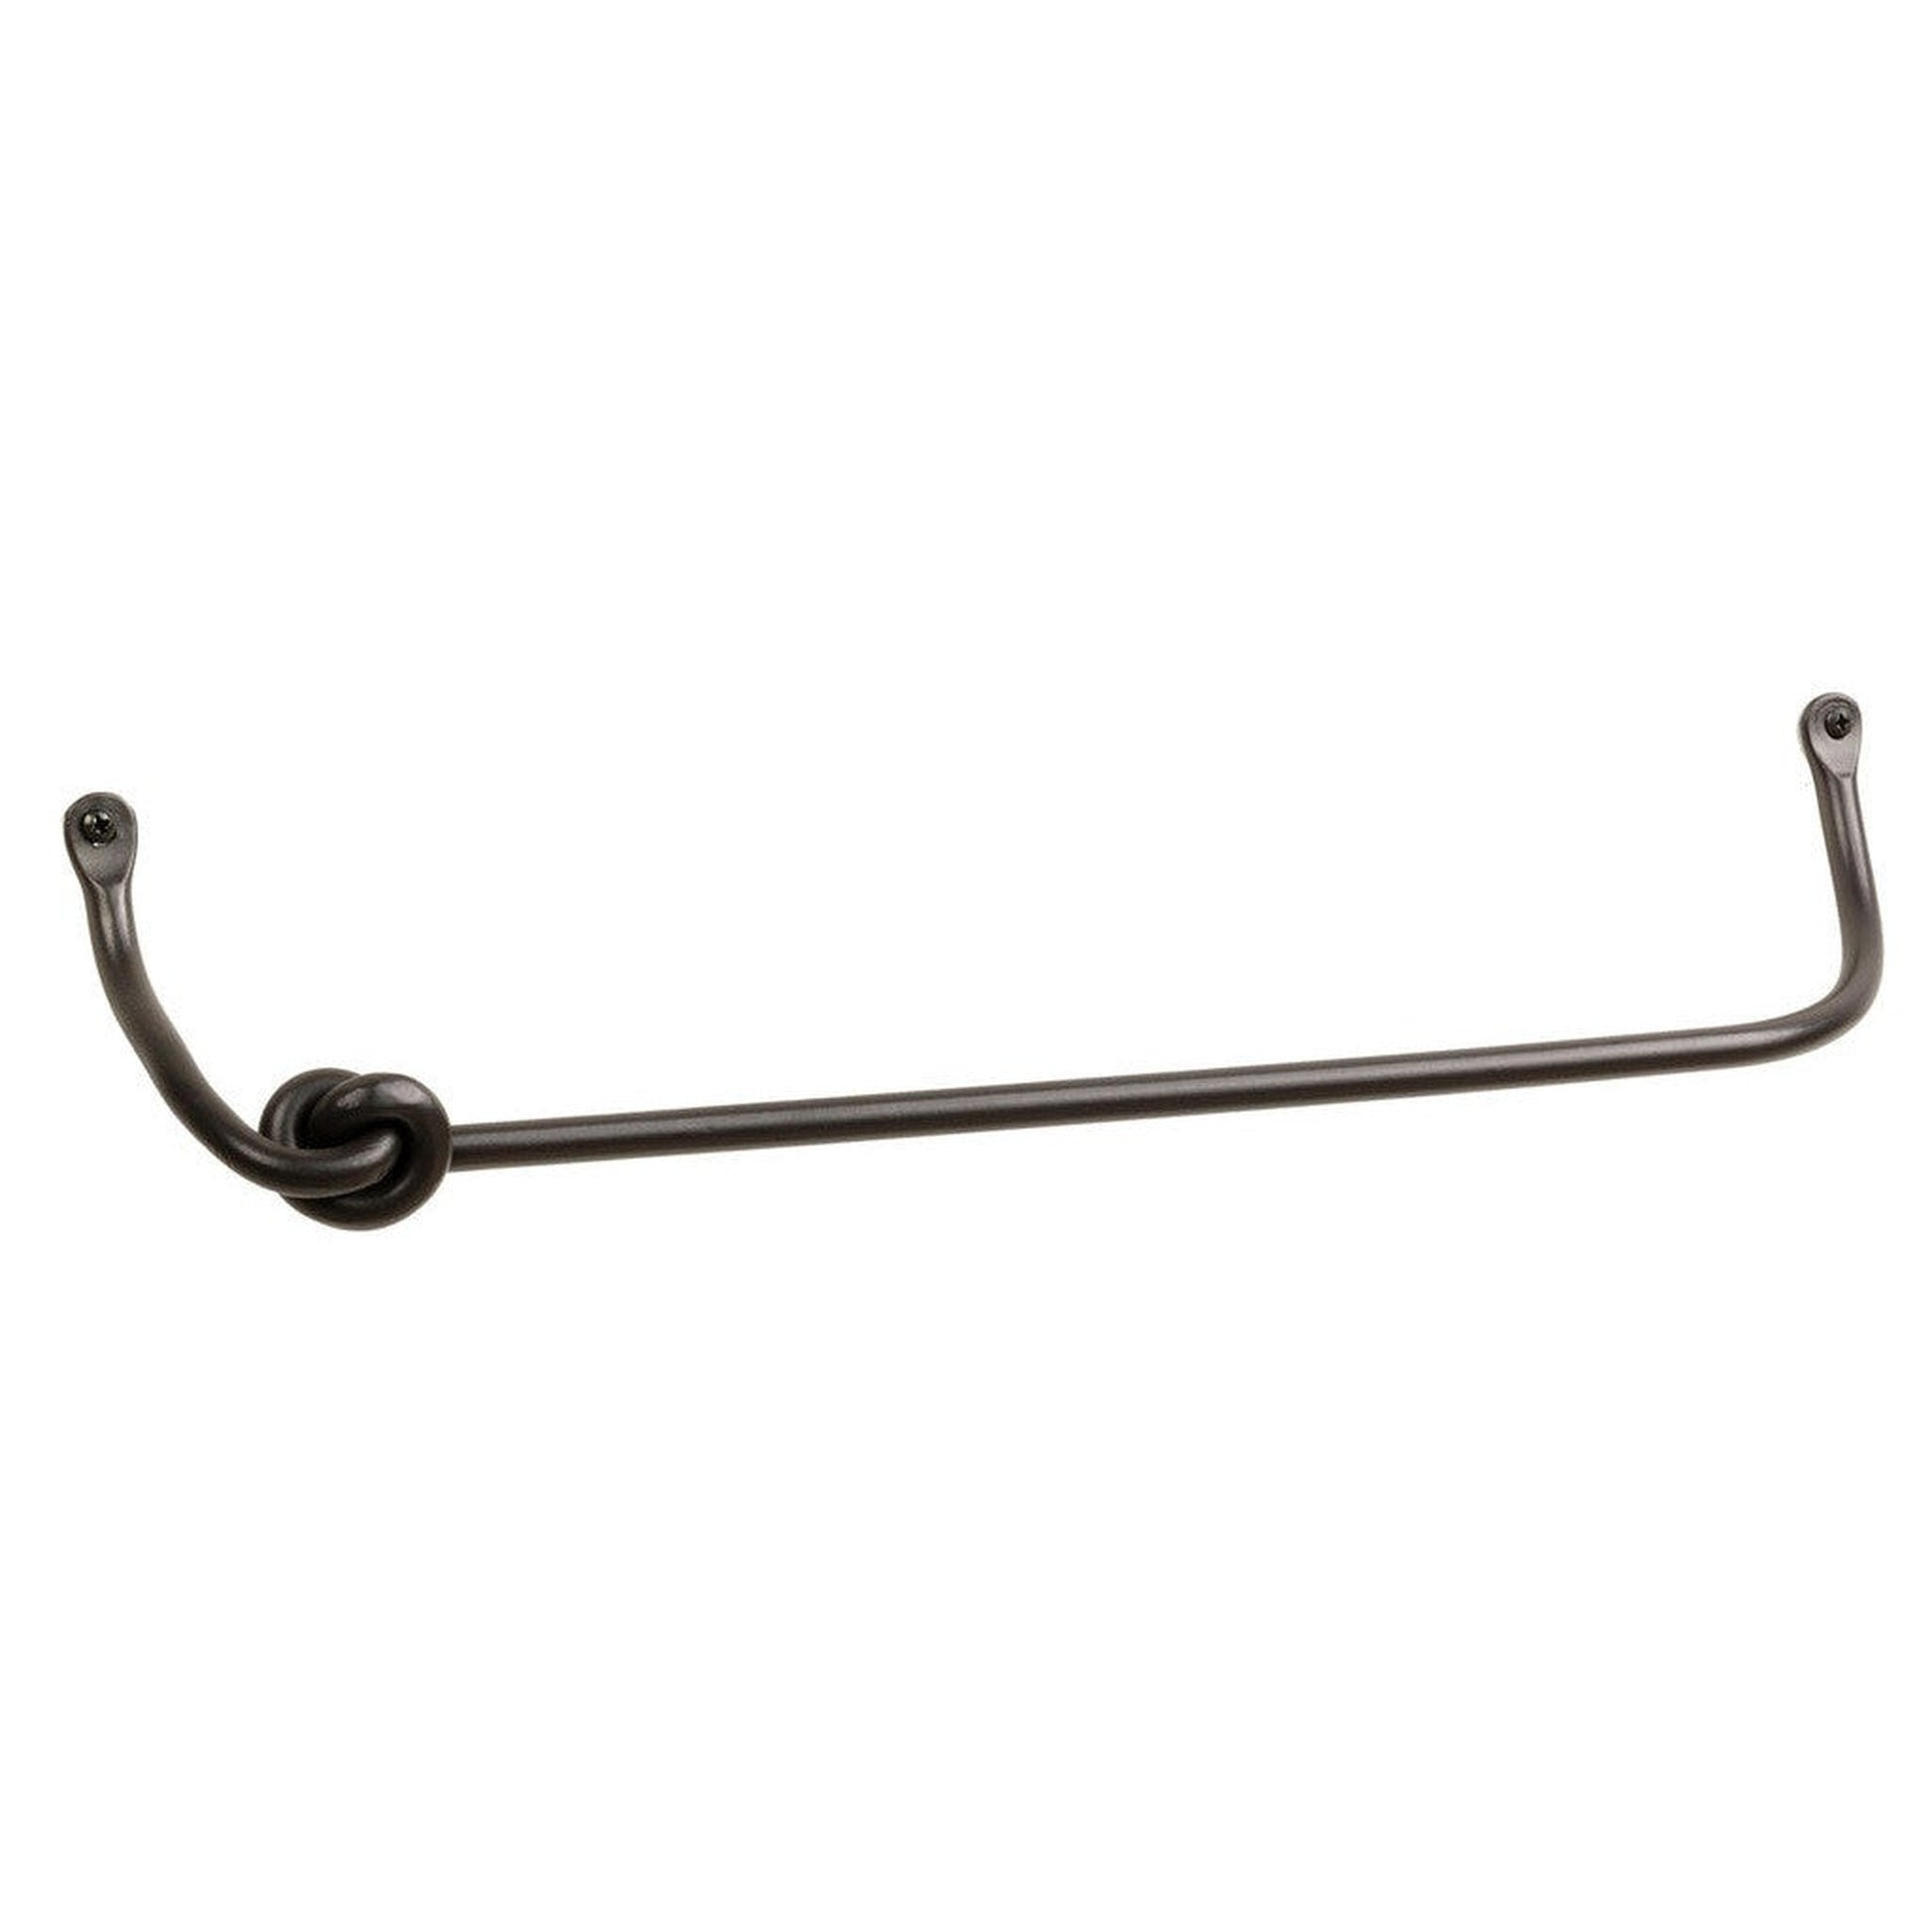 Stone County Ironworks Knot 32" Woodland Brown Iron Towel Bar